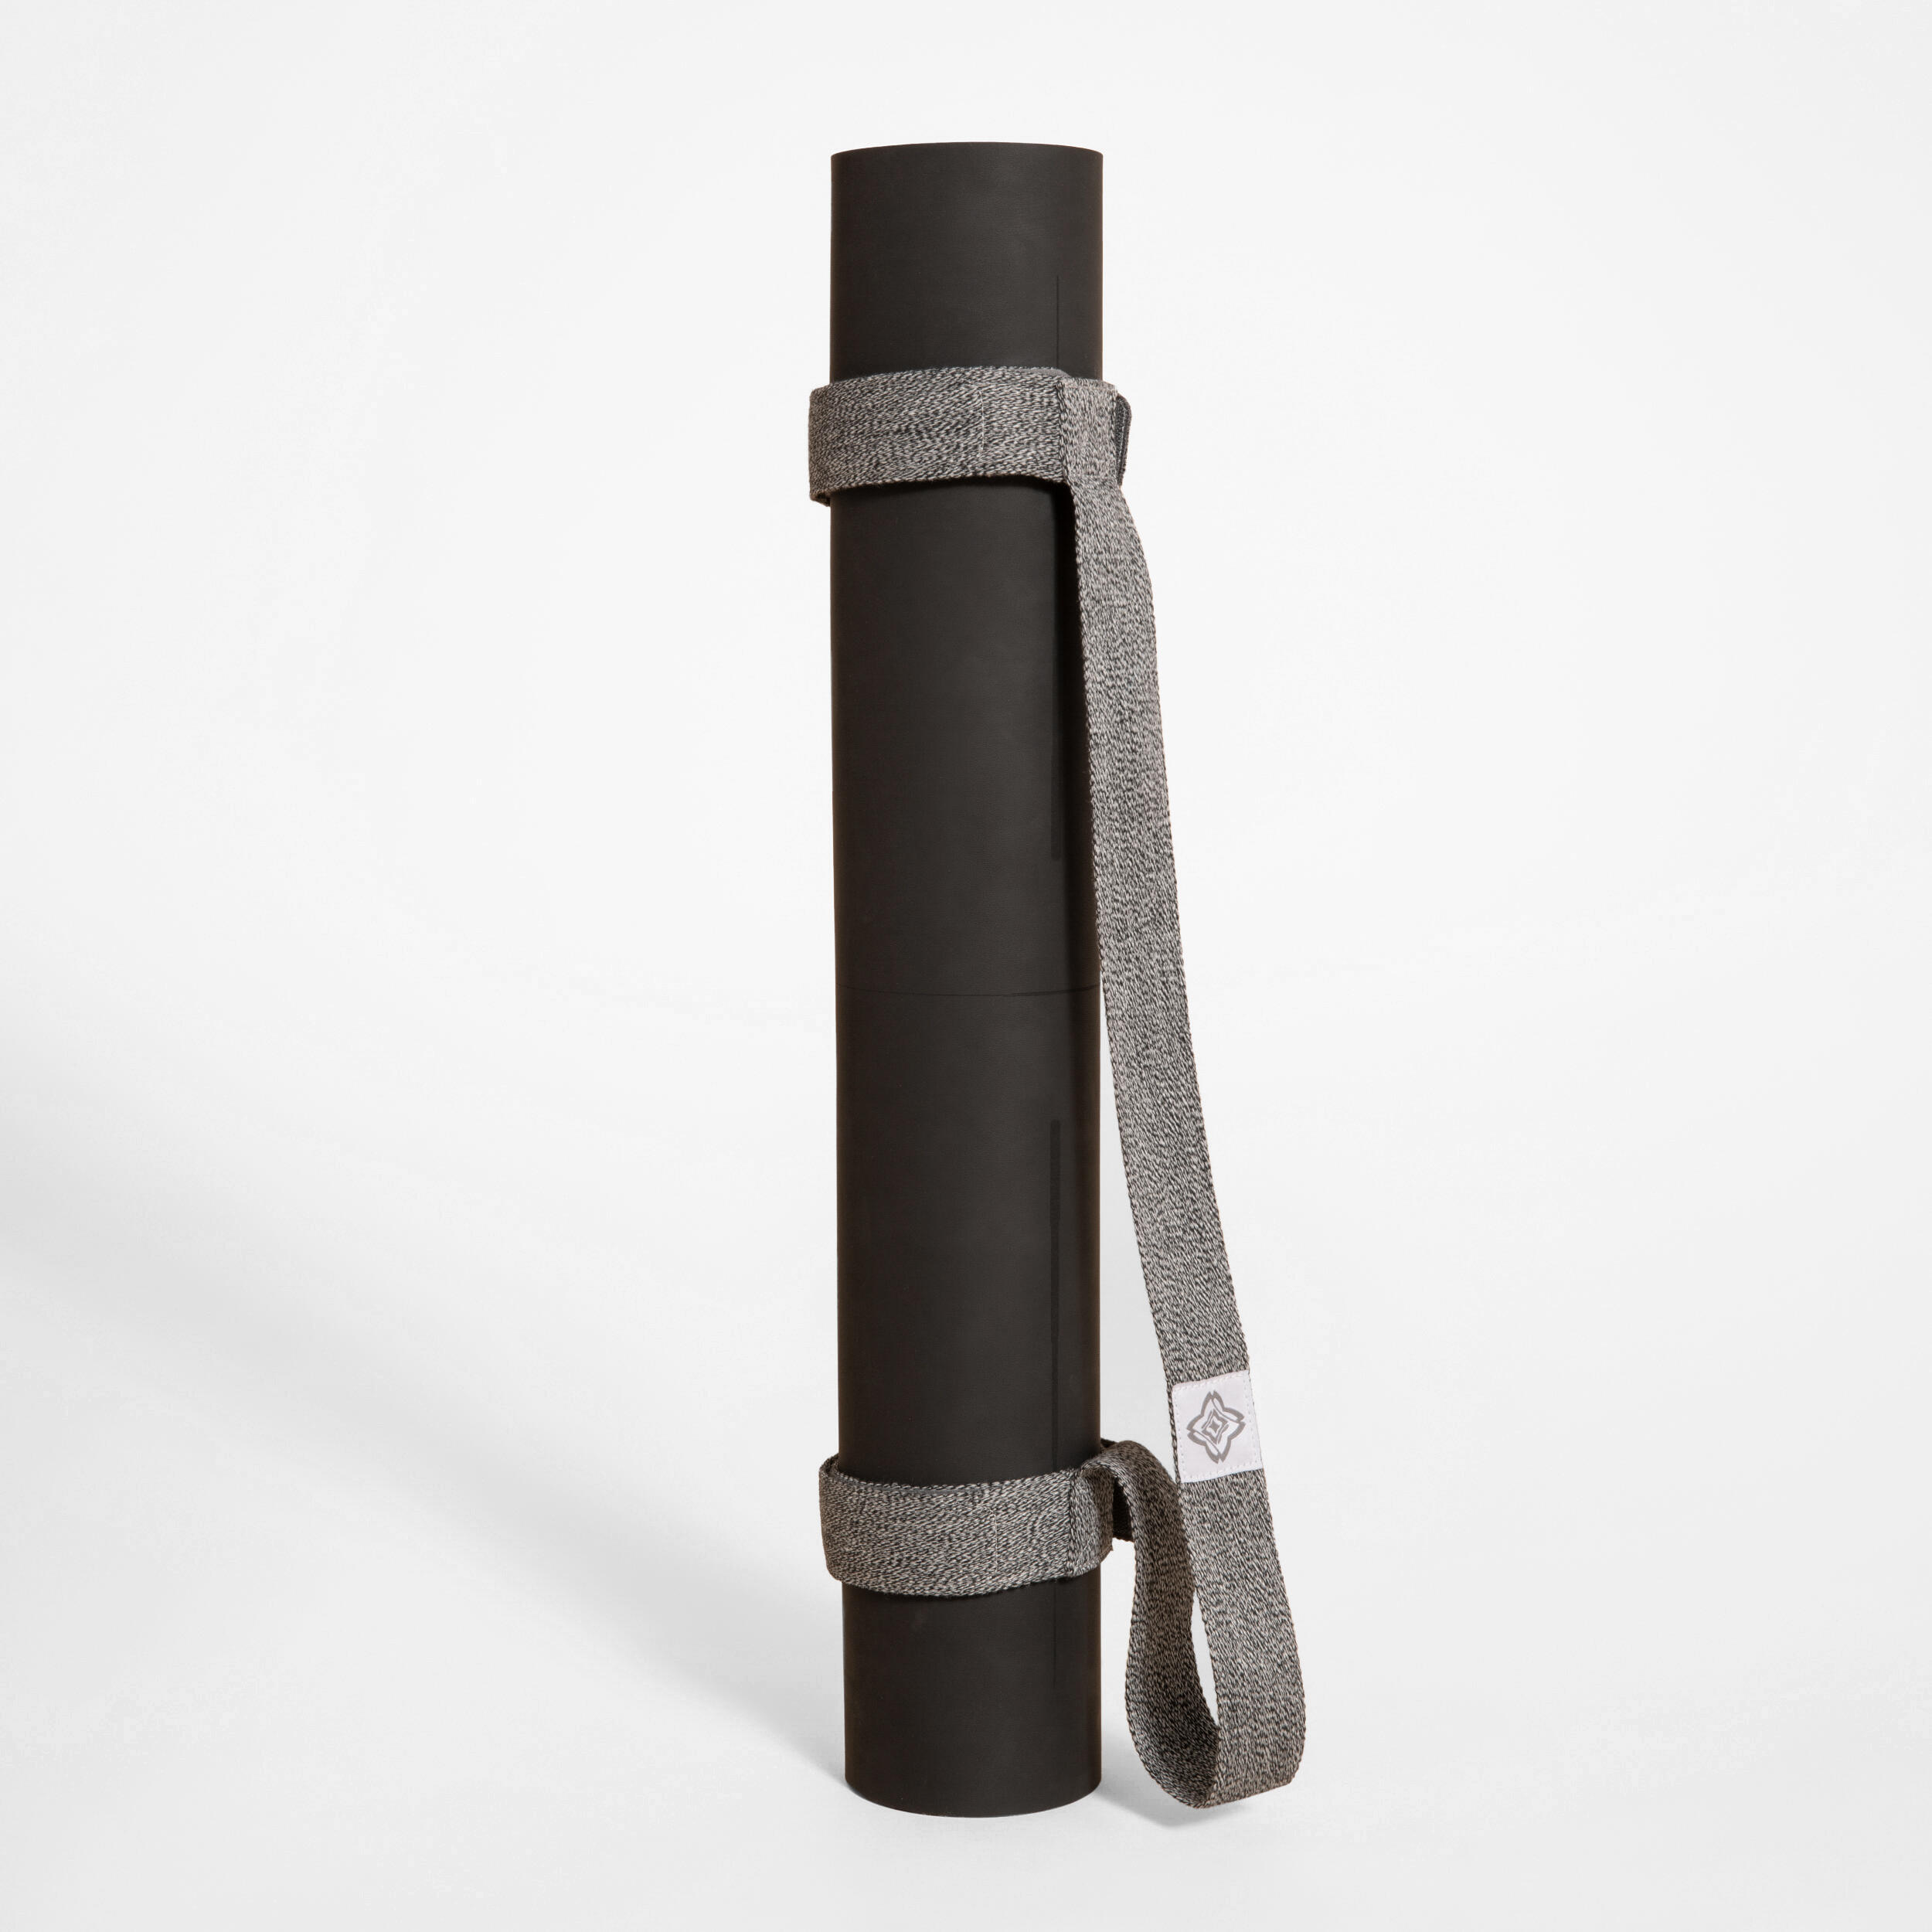 TIPFIT yoga mat carrier strap, hand woven (by the manufacturer, not me)